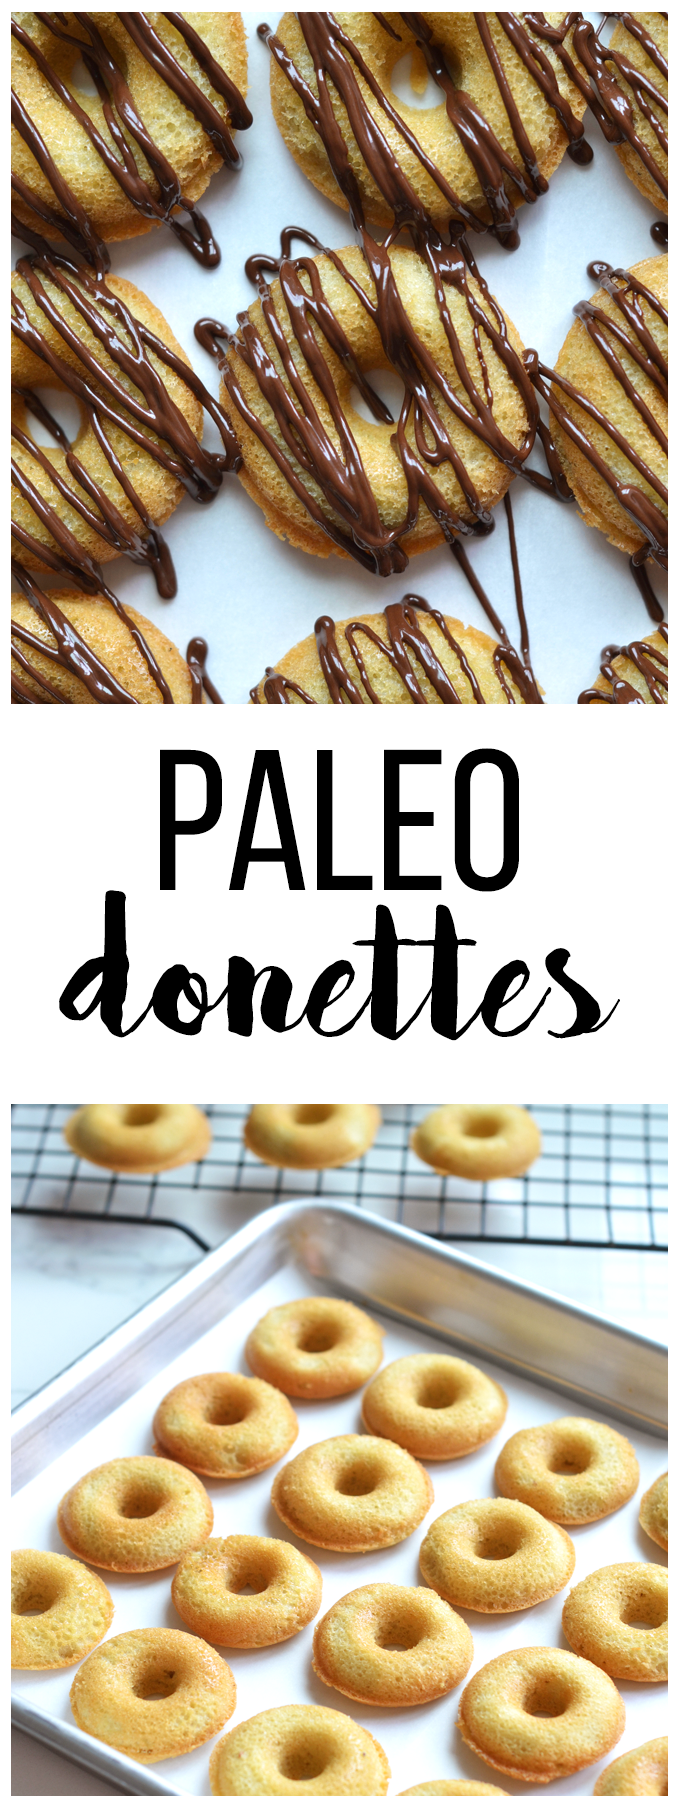 These paleo donettes are perfect little bites of a grain free treat!